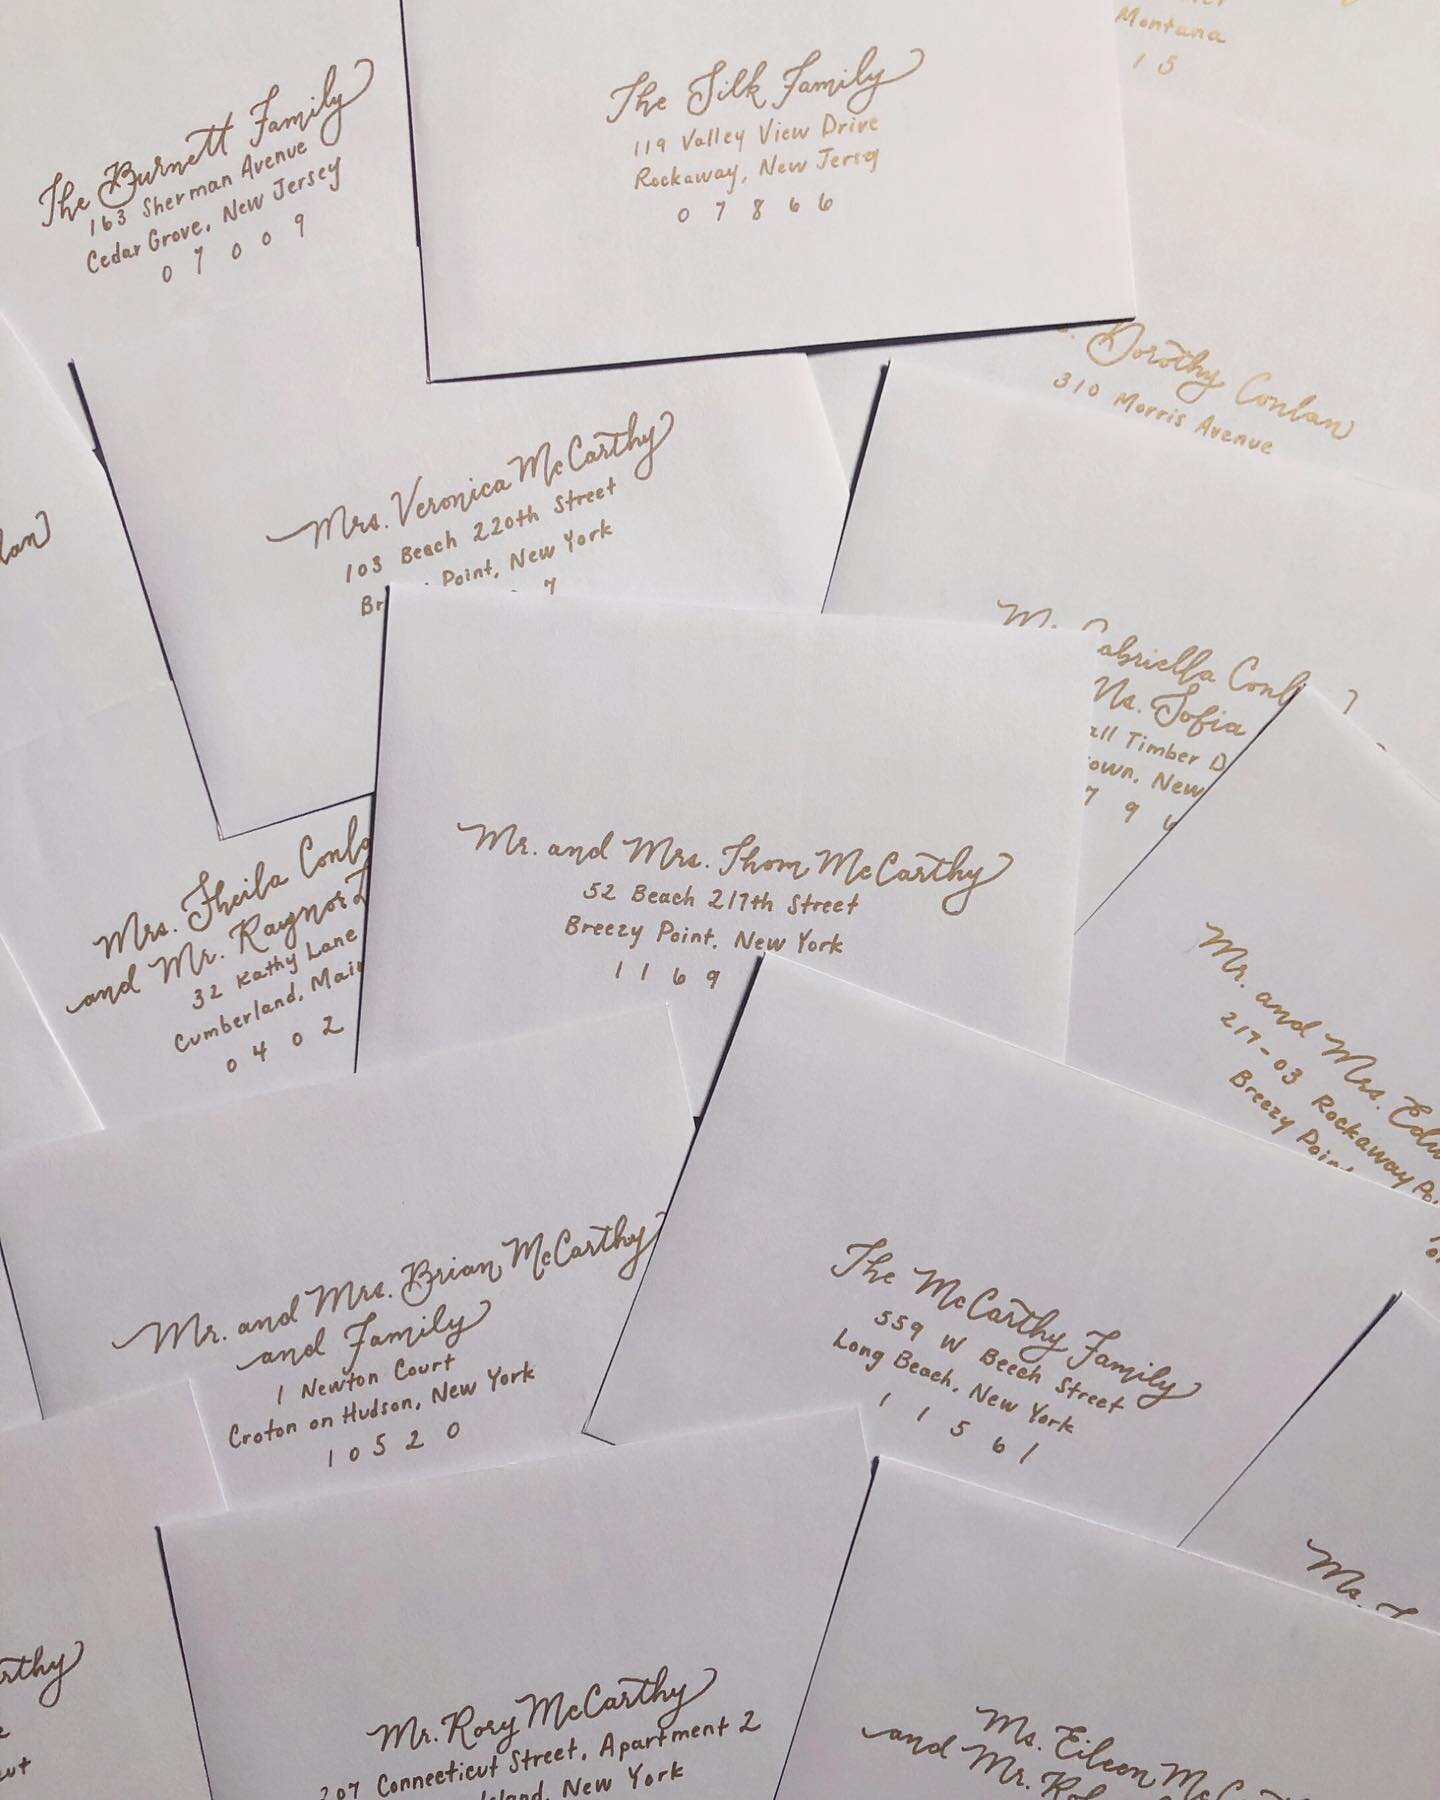 We are THRILLED that outdoor weddings and events are beginning to pick back up again here in New Jersey! Excited to get these hand lettered envelopes to their recipients ✨
&bull;
&bull;
&bull;
&bull;
#calligraphy #handlettering #lettering #moderncall